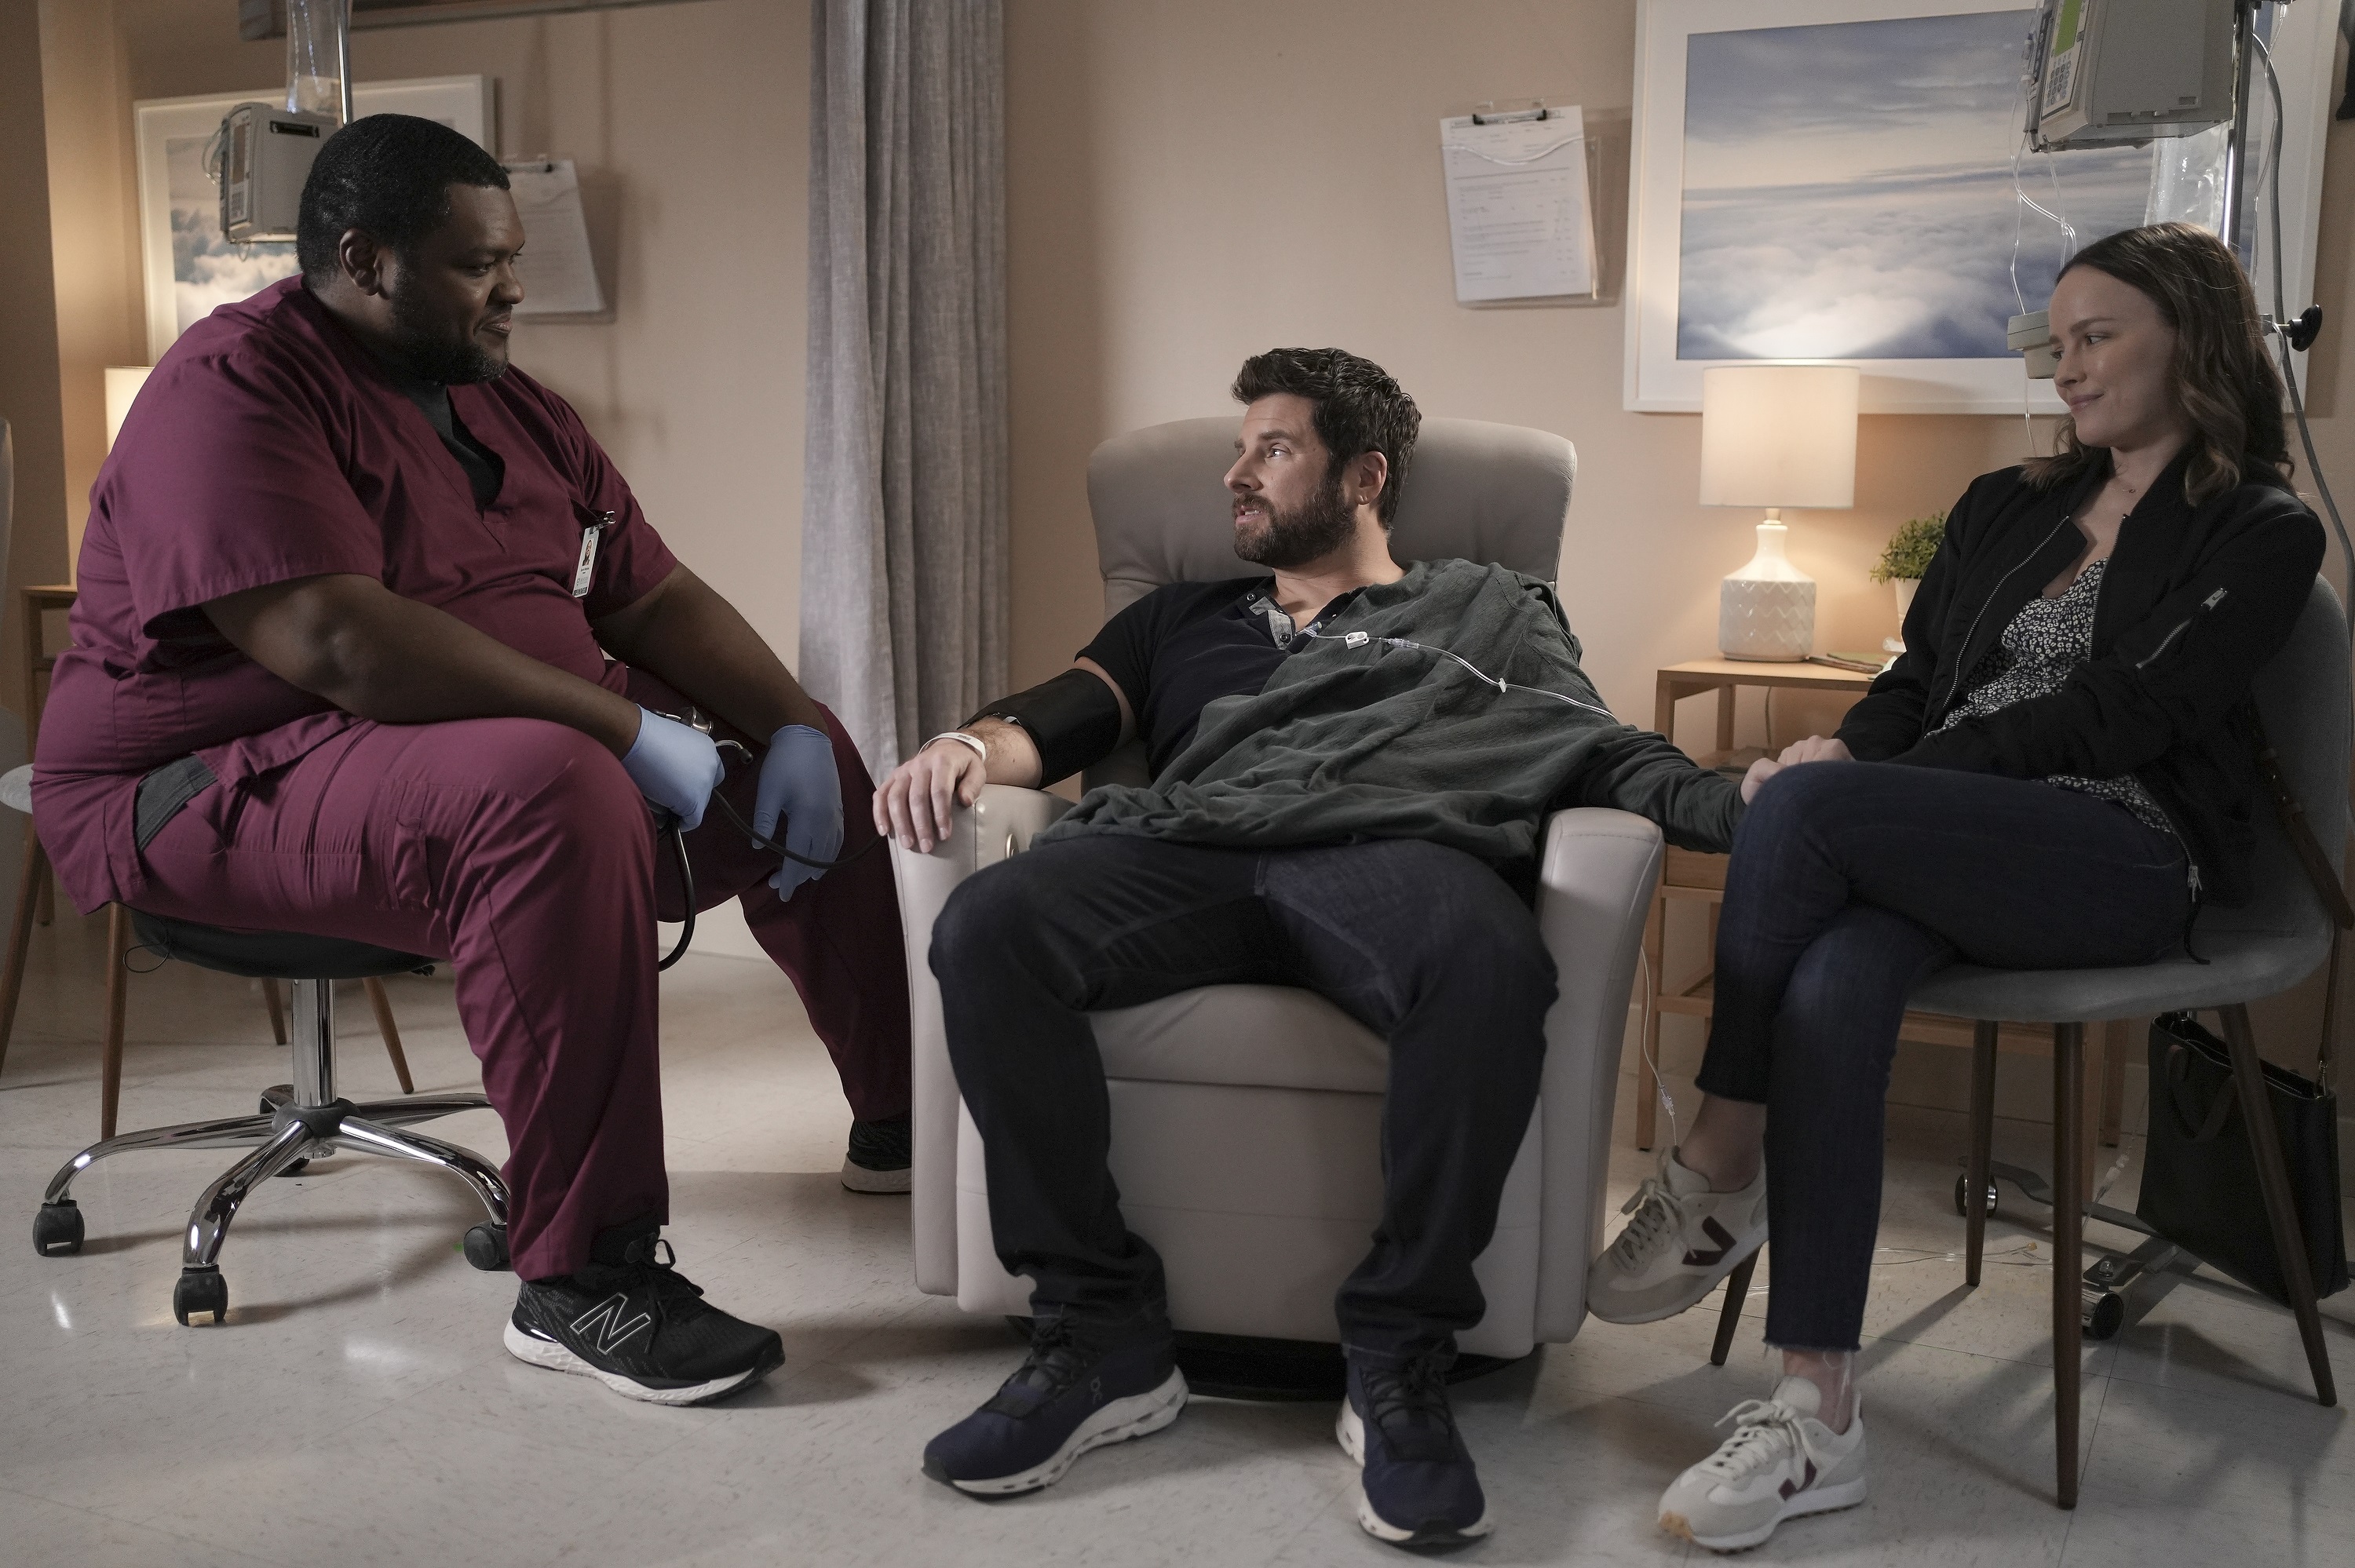 'A Million Little Things' Jordan R. Coleman, James Roday Rodriguez, and Allison Miller sit together talking